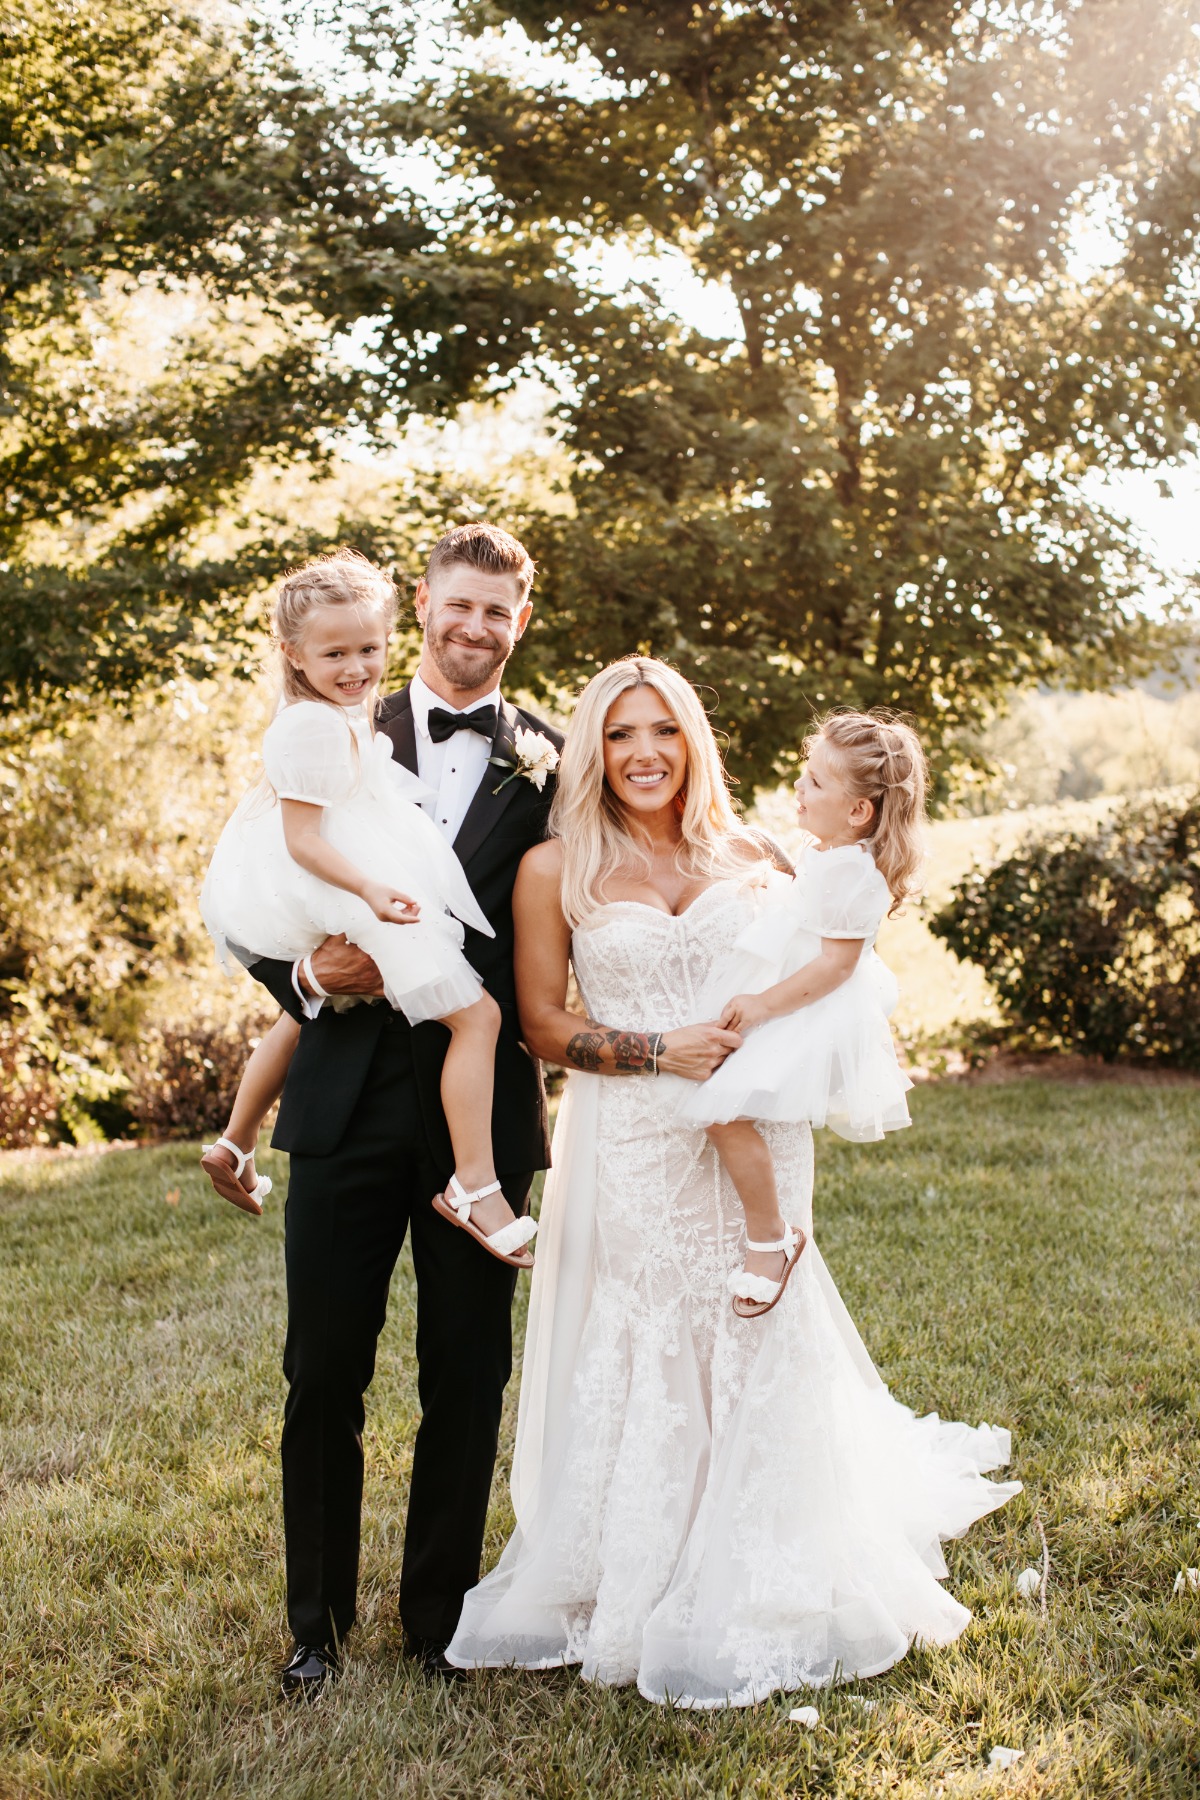 Austin Watson and family at wedding with daughters